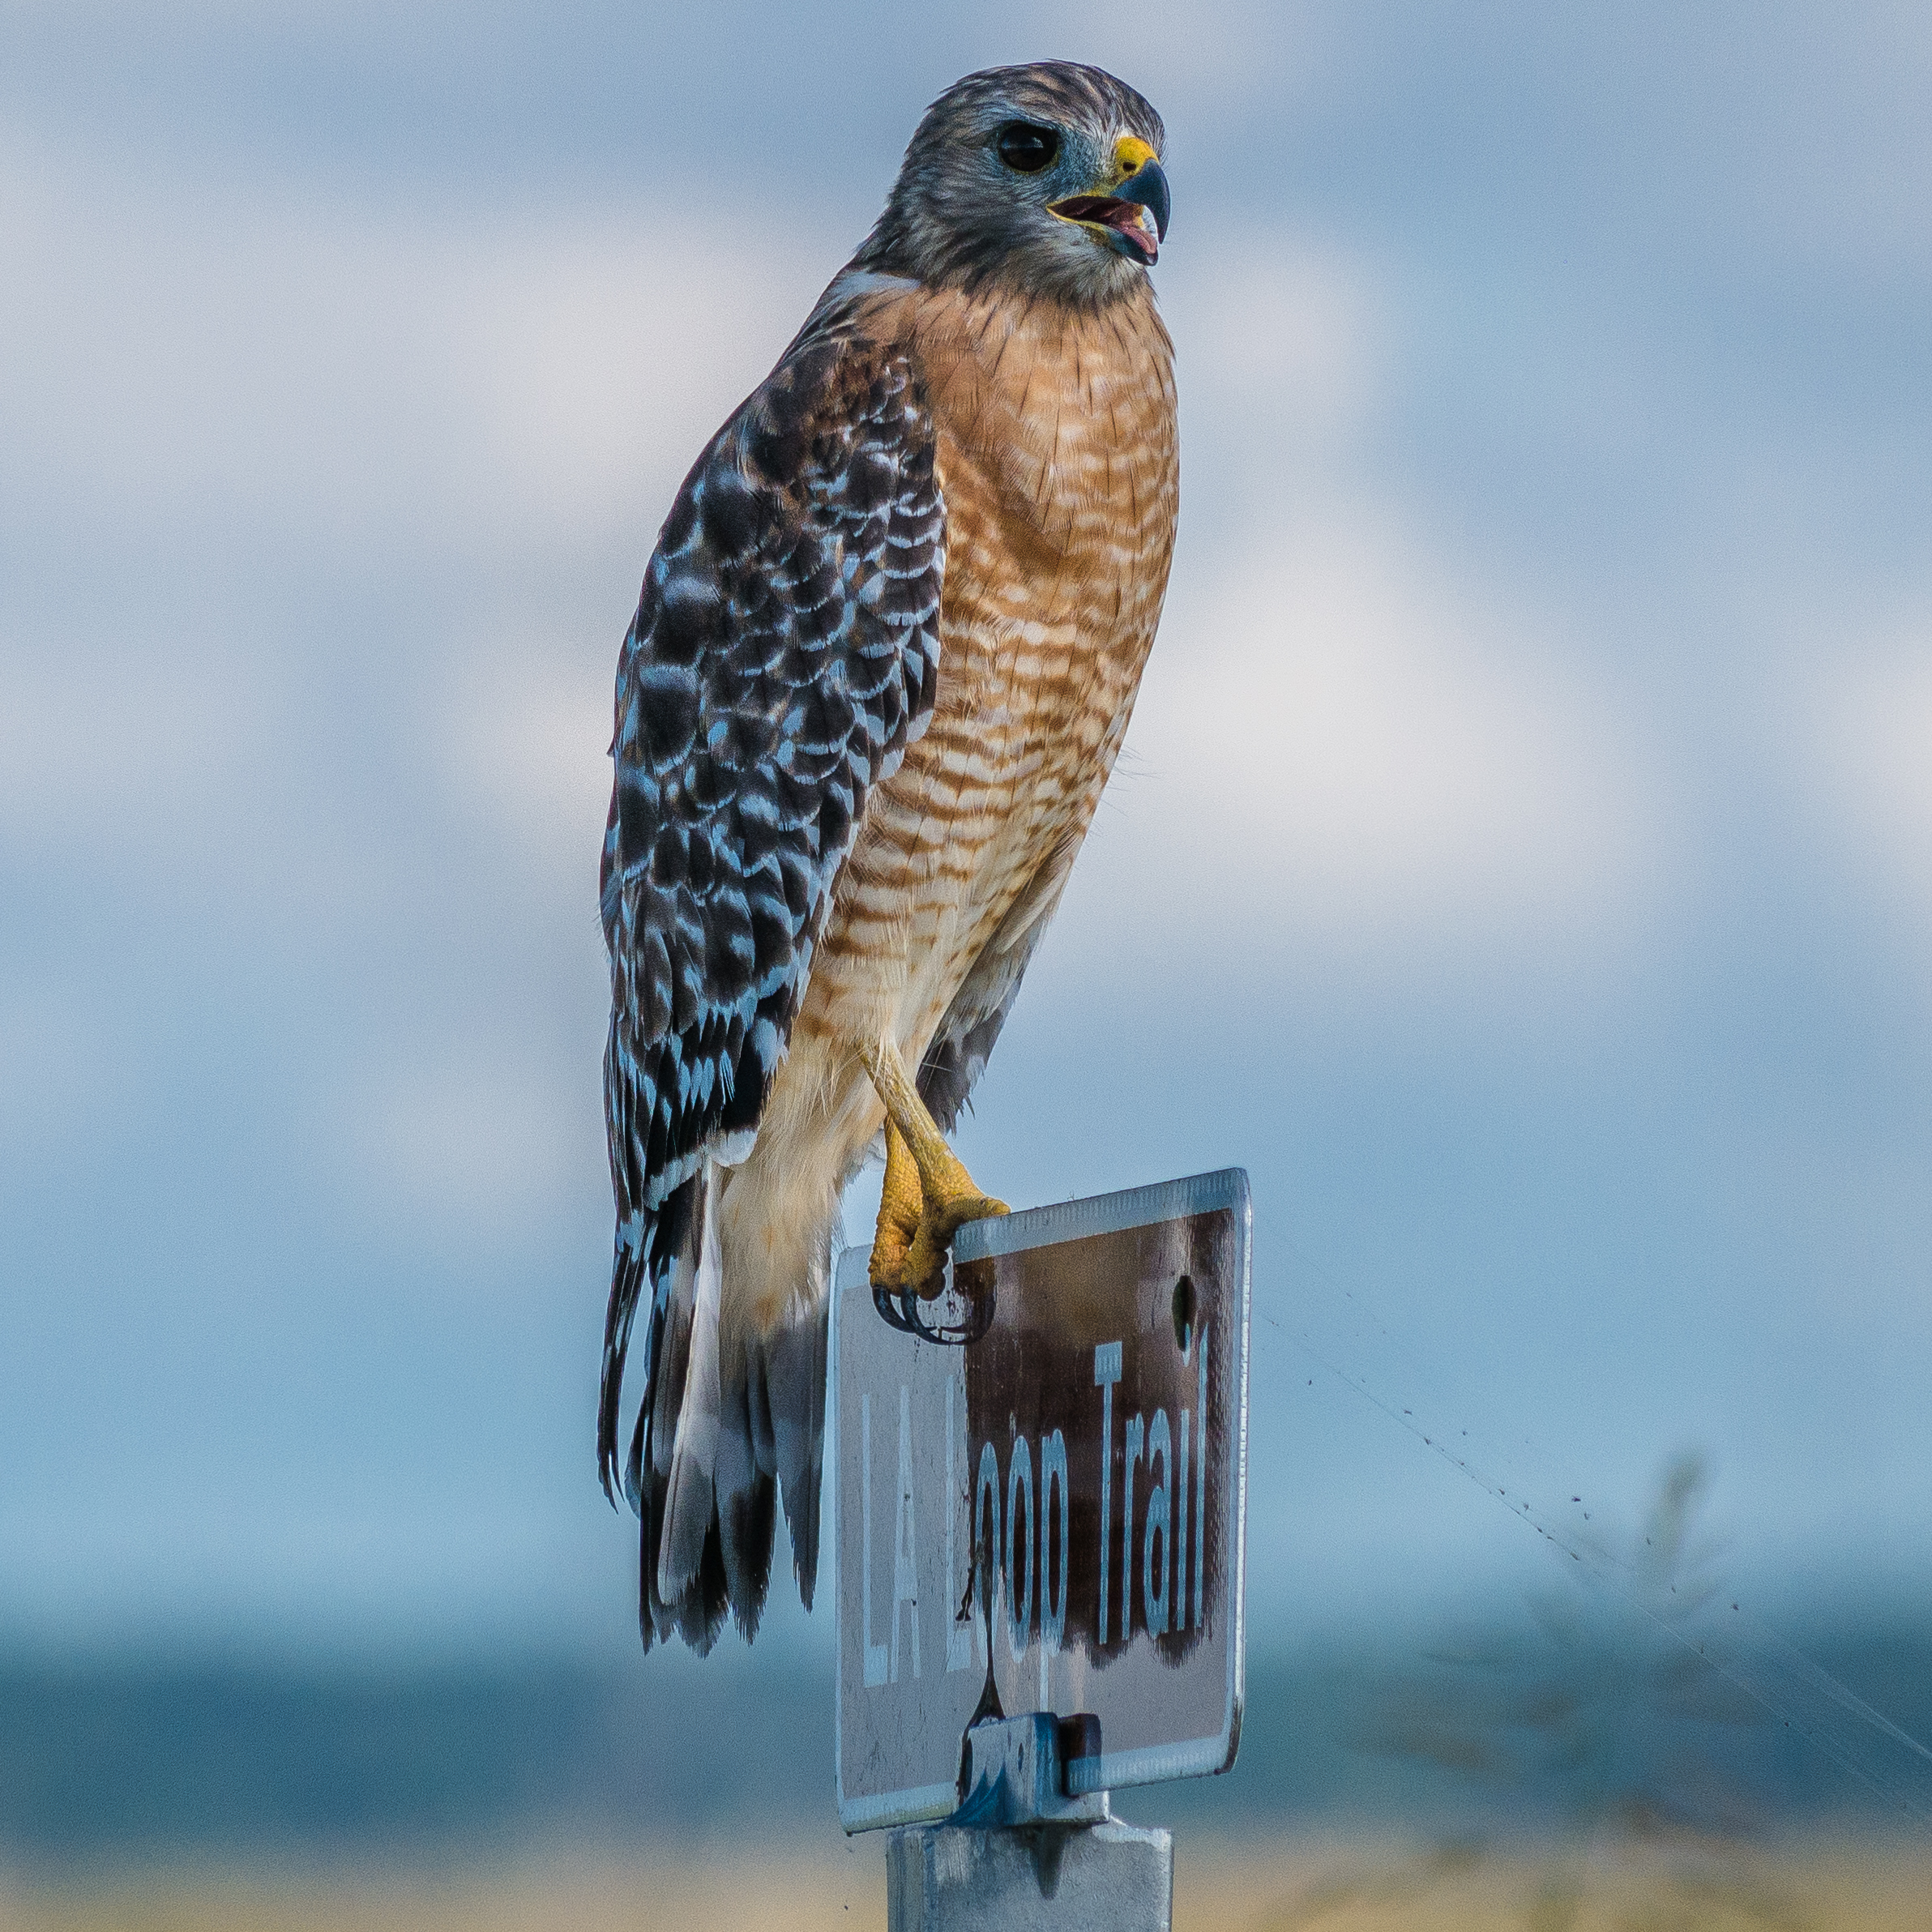 Red tail hawk as author picture.